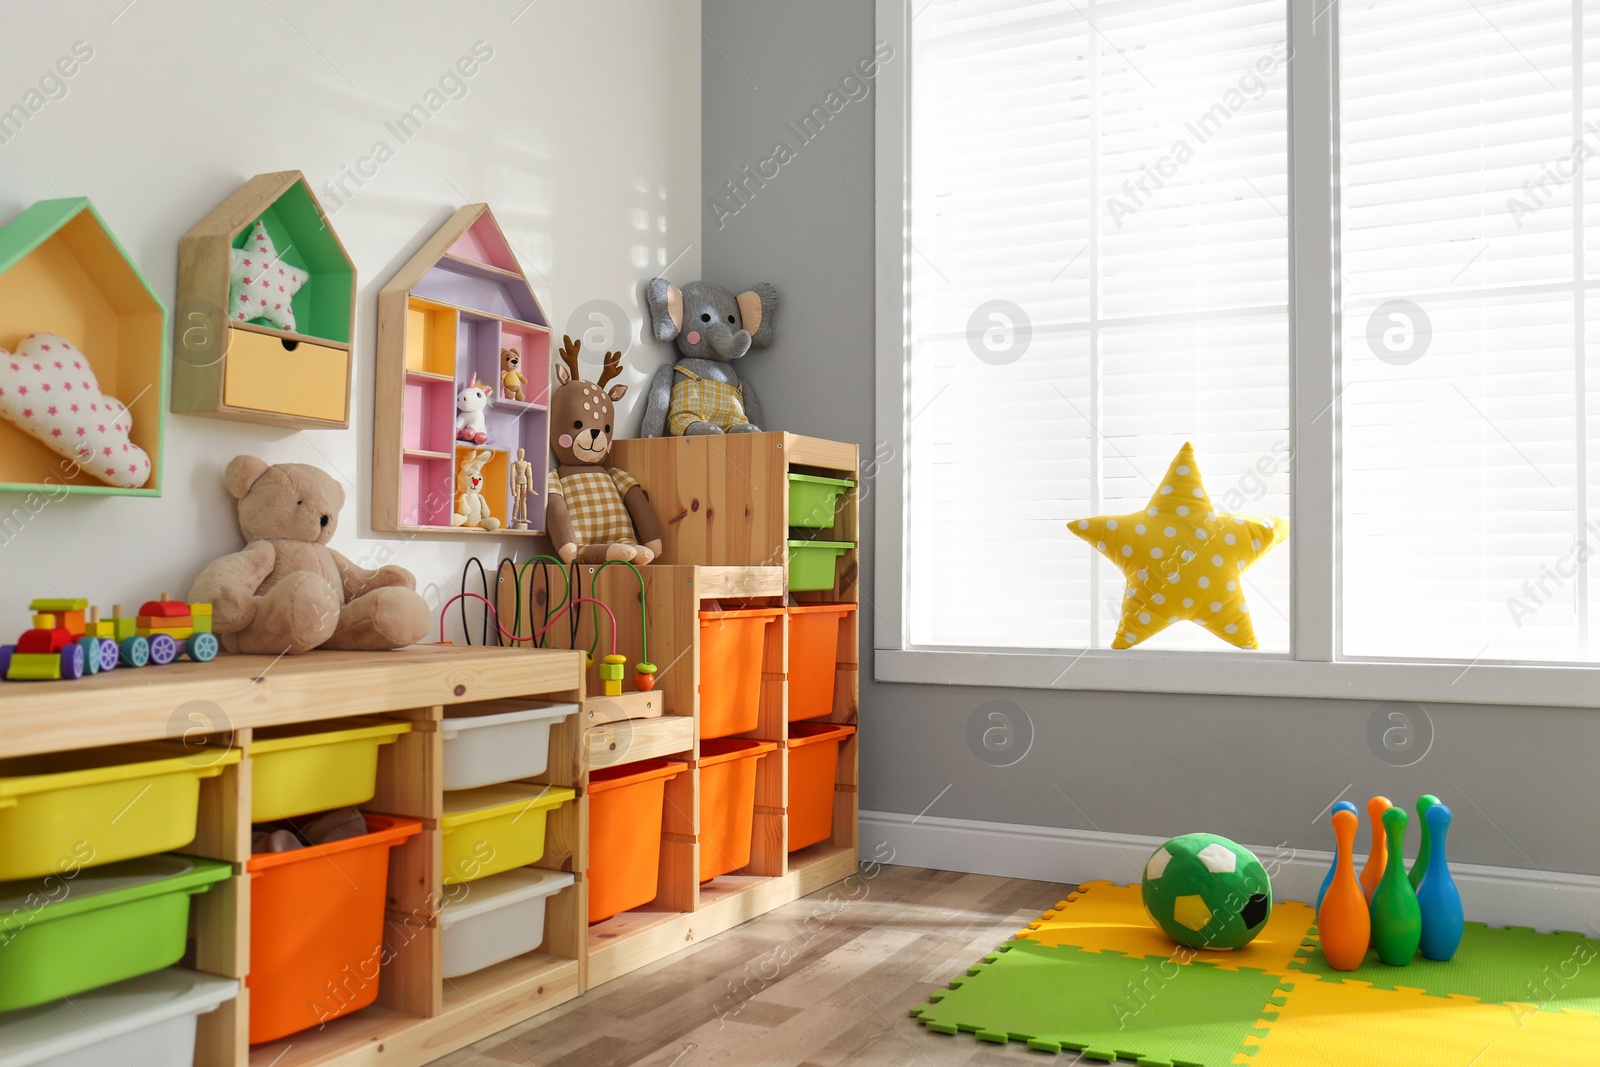 Photo of Stylish playroom interior with shelving unit and different soft toys